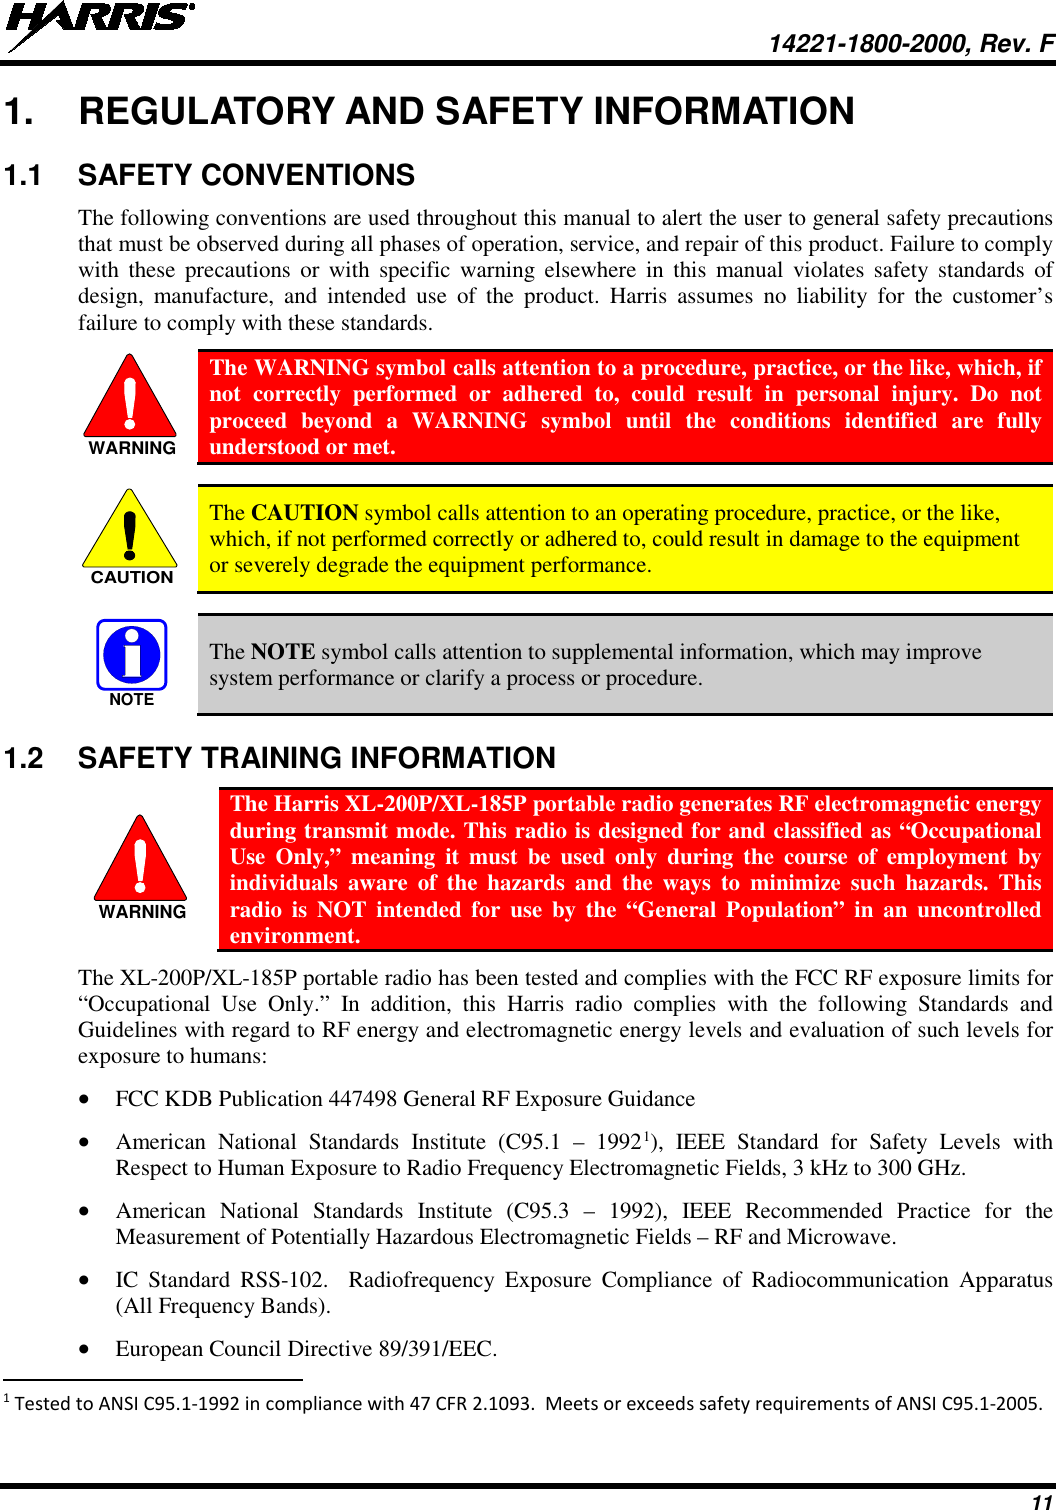  14221-1800-2000, Rev. F 11 1. REGULATORY AND SAFETY INFORMATION 1.1 SAFETY CONVENTIONS The following conventions are used throughout this manual to alert the user to general safety precautions that must be observed during all phases of operation, service, and repair of this product. Failure to comply with these precautions or with specific warning elsewhere in this manual violates safety standards of design, manufacture, and intended use of the product. Harris assumes no liability for the customer’s failure to comply with these standards.  The WARNING symbol calls attention to a procedure, practice, or the like, which, if not correctly performed or adhered to, could result in personal injury. Do not proceed beyond a WARNING symbol until the conditions identified are fully understood or met.     The CAUTION symbol calls attention to an operating procedure, practice, or the like, which, if not performed correctly or adhered to, could result in damage to the equipment or severely degrade the equipment performance.     The NOTE symbol calls attention to supplemental information, which may improve system performance or clarify a process or procedure. 1.2 SAFETY TRAINING INFORMATION  The Harris XL-200P/XL-185P portable radio generates RF electromagnetic energy during transmit mode. This radio is designed for and classified as “Occupational Use Only,” meaning it must be used only during the course of employment by individuals aware of the hazards and the ways to minimize such hazards. This radio is NOT intended for use by the “General Population” in an uncontrolled environment. The XL-200P/XL-185P portable radio has been tested and complies with the FCC RF exposure limits for “Occupational Use Only.”  In addition, this Harris radio complies with the following Standards and Guidelines with regard to RF energy and electromagnetic energy levels and evaluation of such levels for exposure to humans: • FCC KDB Publication 447498 General RF Exposure Guidance • American National Standards Institute (C95.1 –  19921), IEEE Standard for Safety Levels with Respect to Human Exposure to Radio Frequency Electromagnetic Fields, 3 kHz to 300 GHz. • American National Standards Institute (C95.3 –  1992), IEEE Recommended Practice for the Measurement of Potentially Hazardous Electromagnetic Fields – RF and Microwave. • IC Standard RSS-102.  Radiofrequency Exposure Compliance of Radiocommunication Apparatus (All Frequency Bands). • European Council Directive 89/391/EEC.                                                            1 Tested to ANSI C95.1-1992 in compliance with 47 CFR 2.1093.  Meets or exceeds safety requirements of ANSI C95.1-2005. WARNINGCAUTIONNOTEWARNING